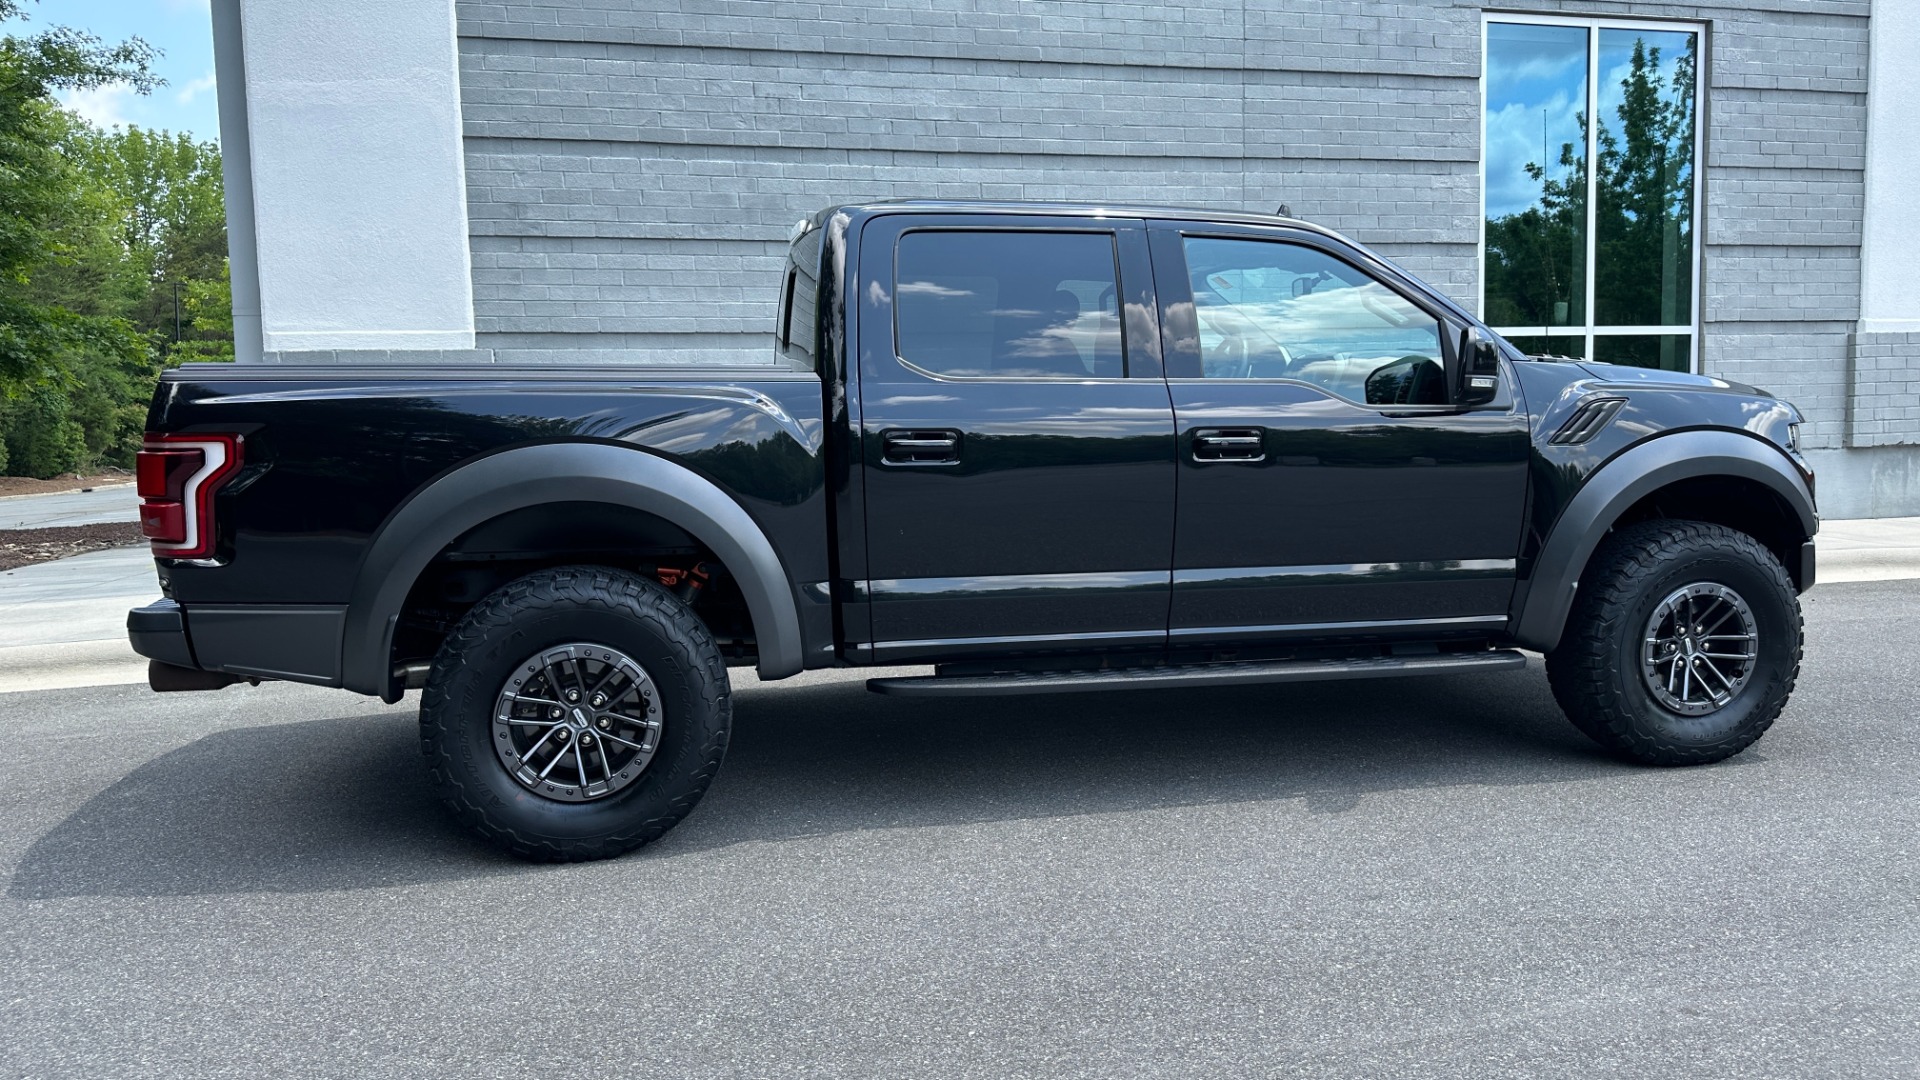 Used 2019 Ford F-150 RAPTOR / ECOBOOST / TECH PKG / PANORAMIC ROOF / BLOCK HEATER for sale $51,995 at Formula Imports in Charlotte NC 28227 6